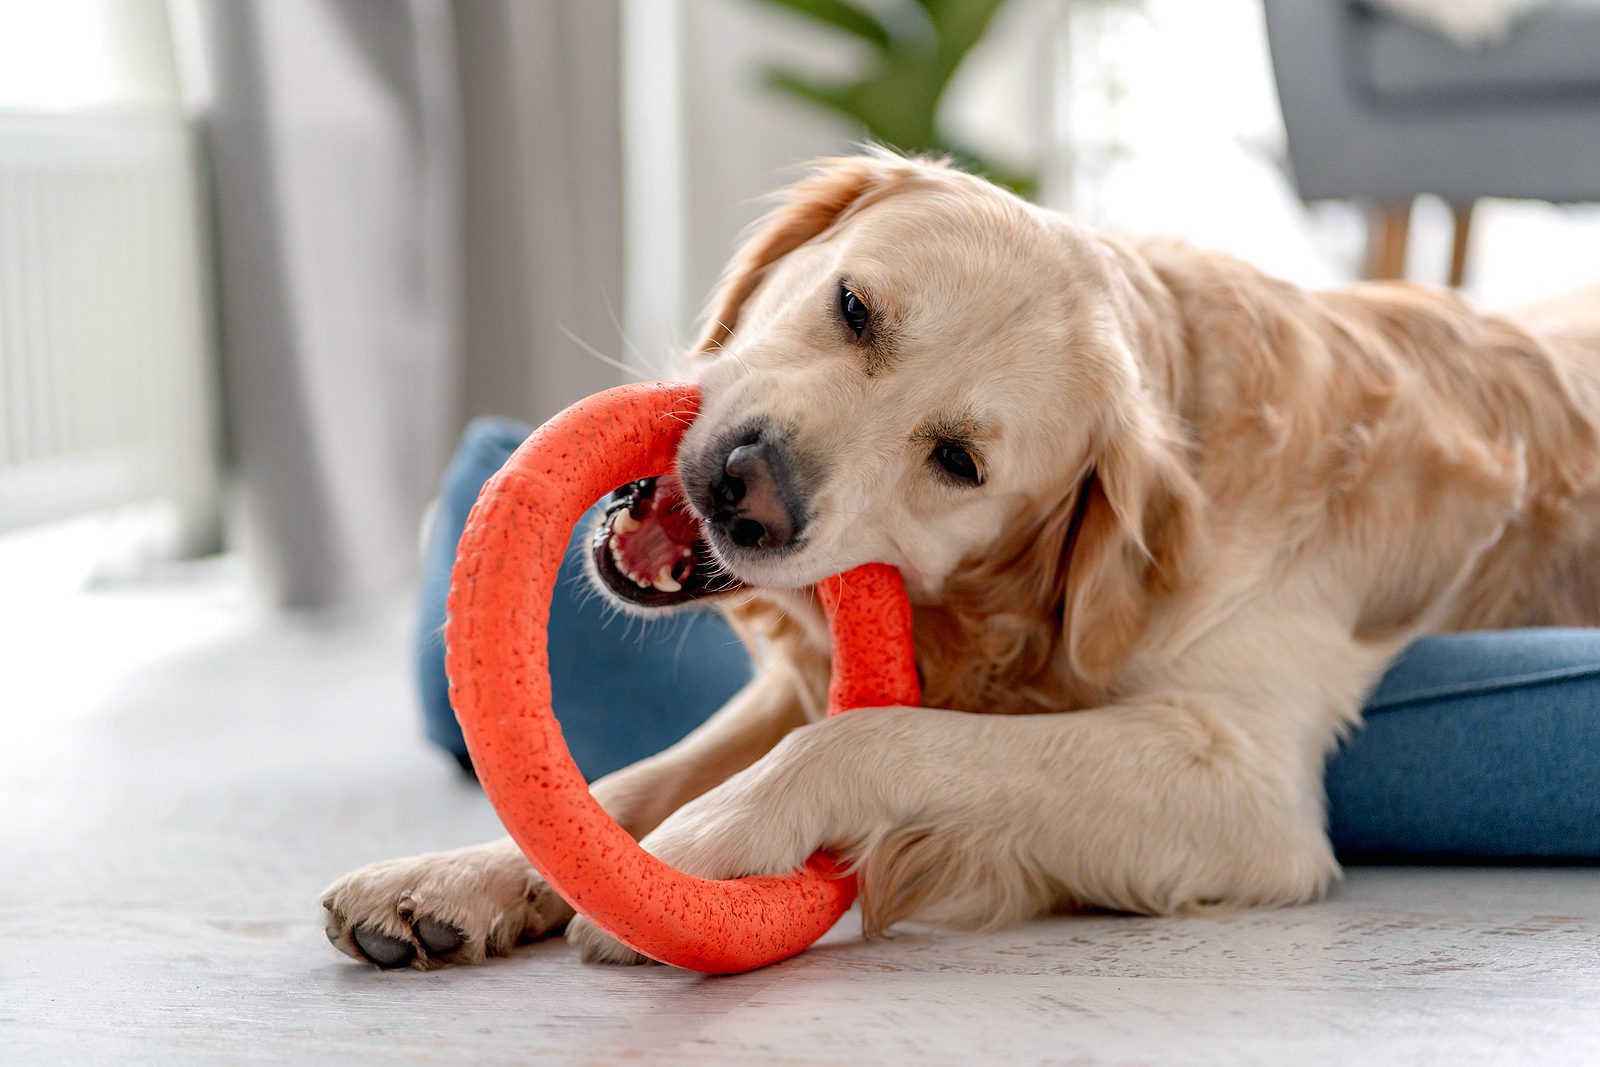 Golden retriever dog biting ring toy while lying on dog bed indoors at home